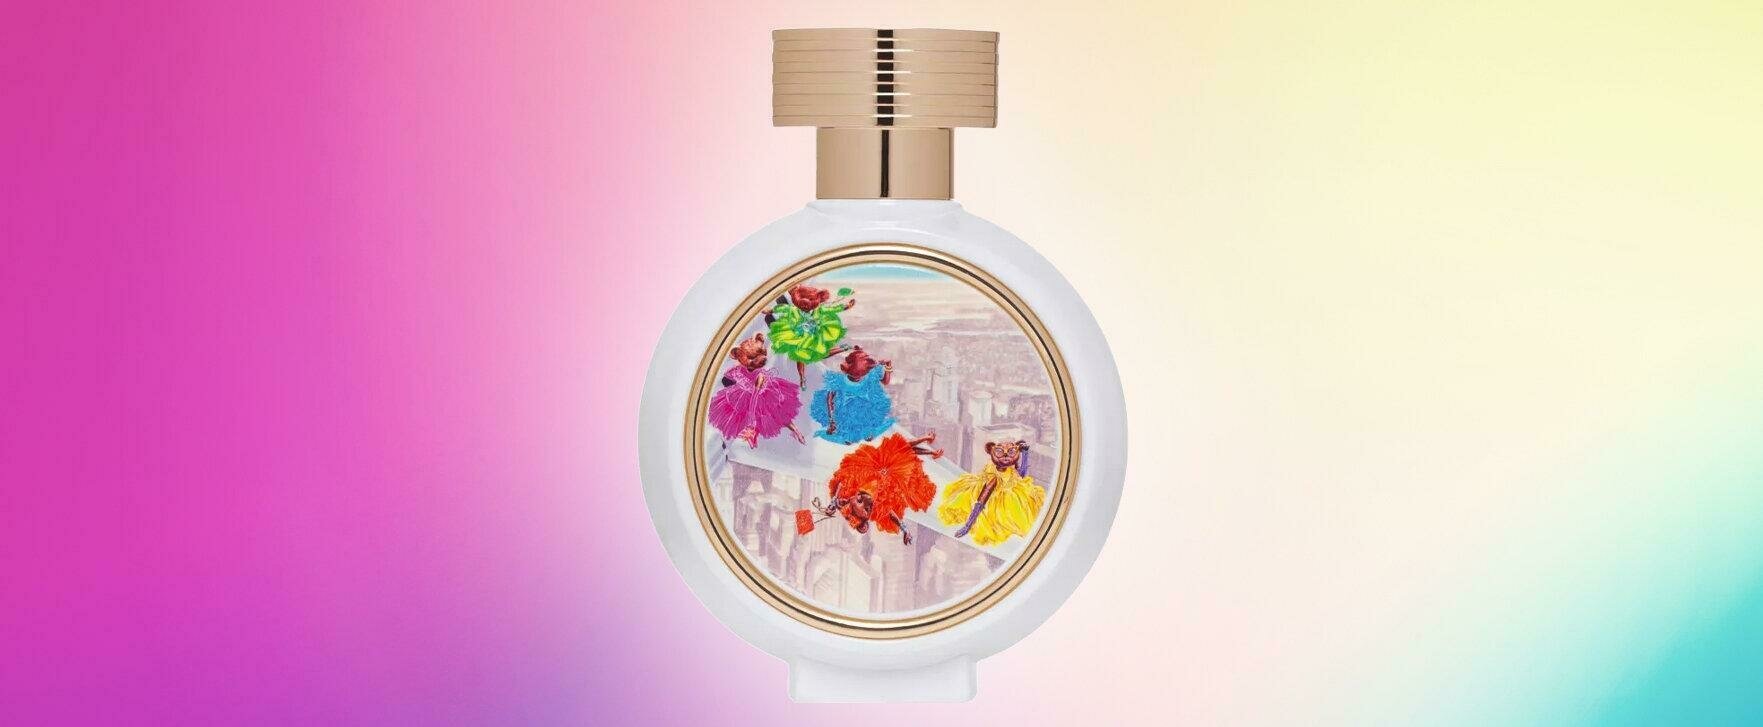 The Magic of Childhood: Haute Fragrance Company Presents the Oriental Fragrance Fly to Miracle